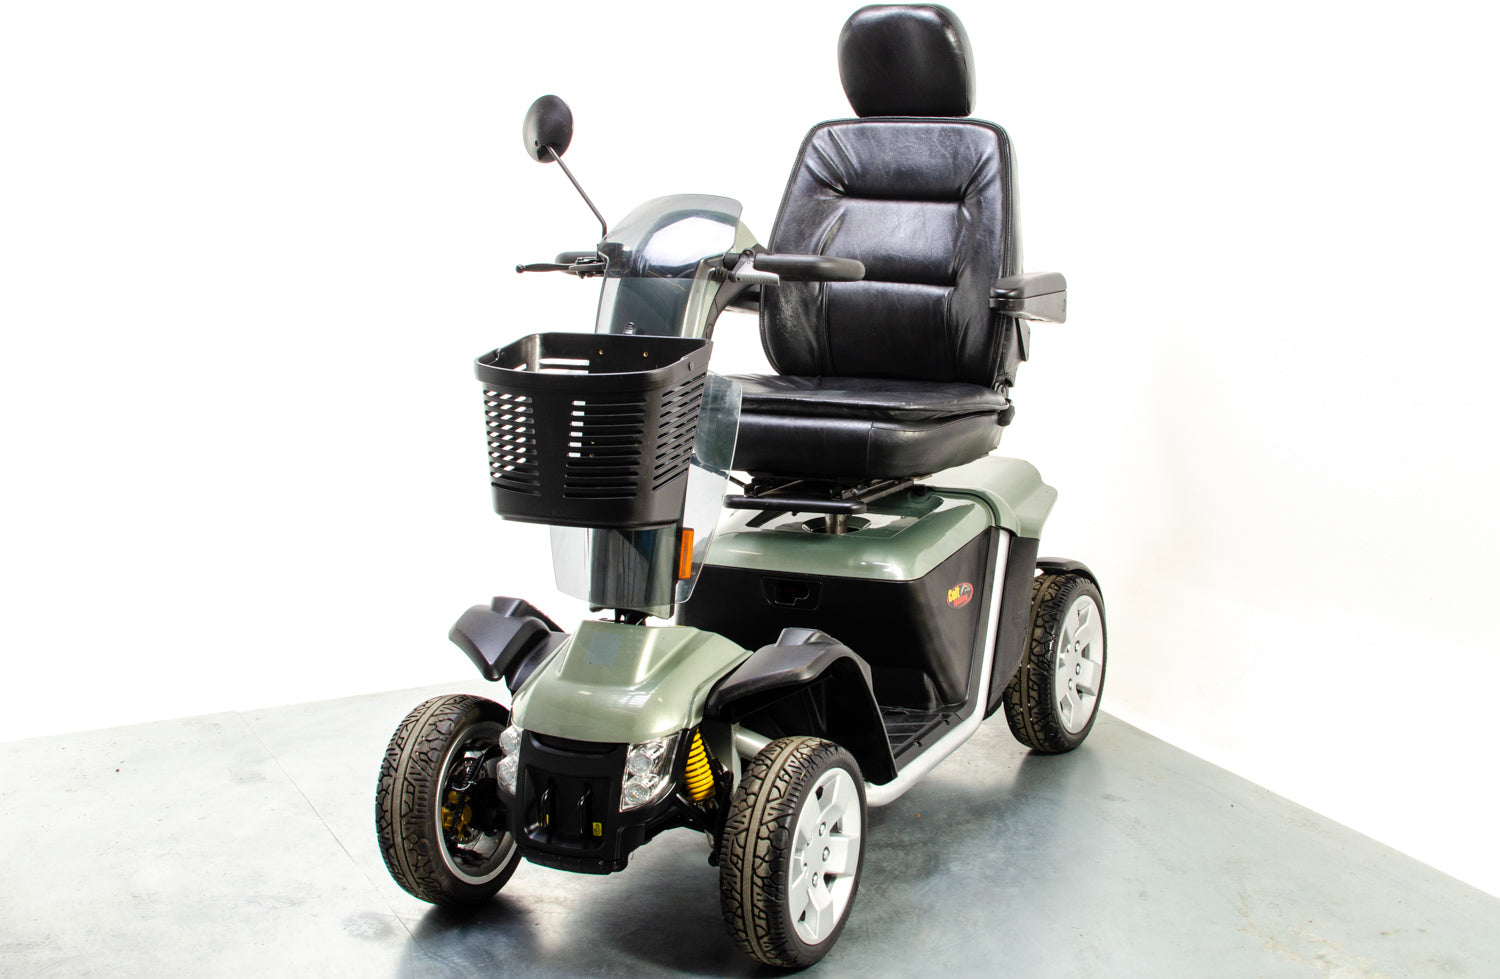 Pride Colt Executive Used Mobility Scooter All-Terrain Off-Road 8mph Road Legal Green